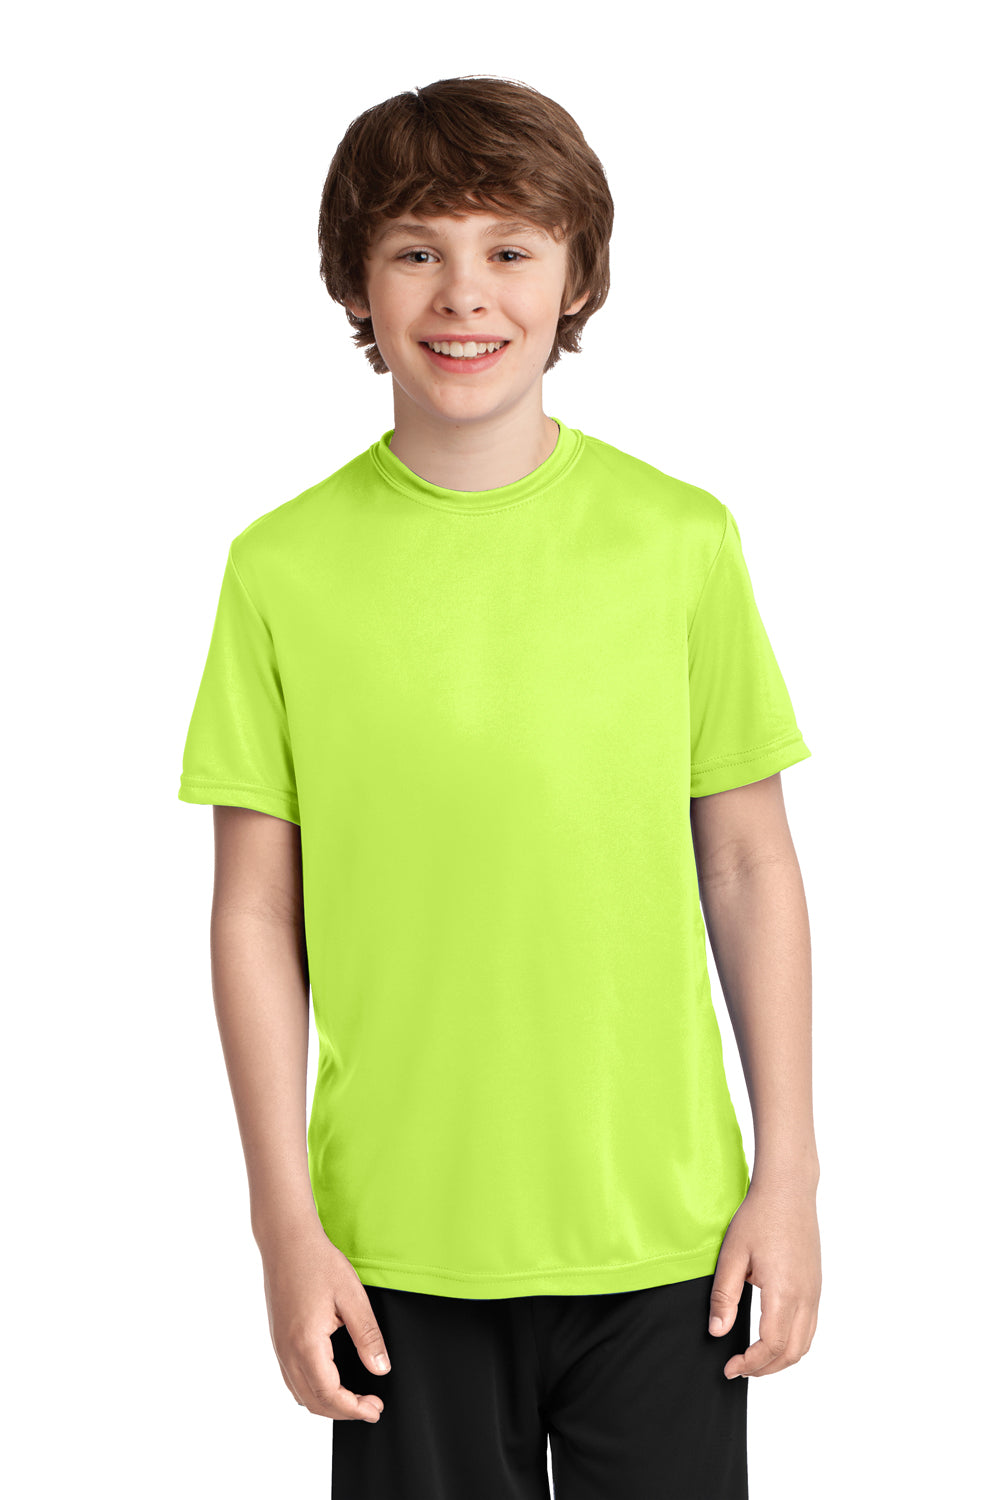 Port & Company PC380Y Youth Dry Zone Performance Moisture Wicking Short Sleeve Crewneck T-Shirt Neon Yellow Front